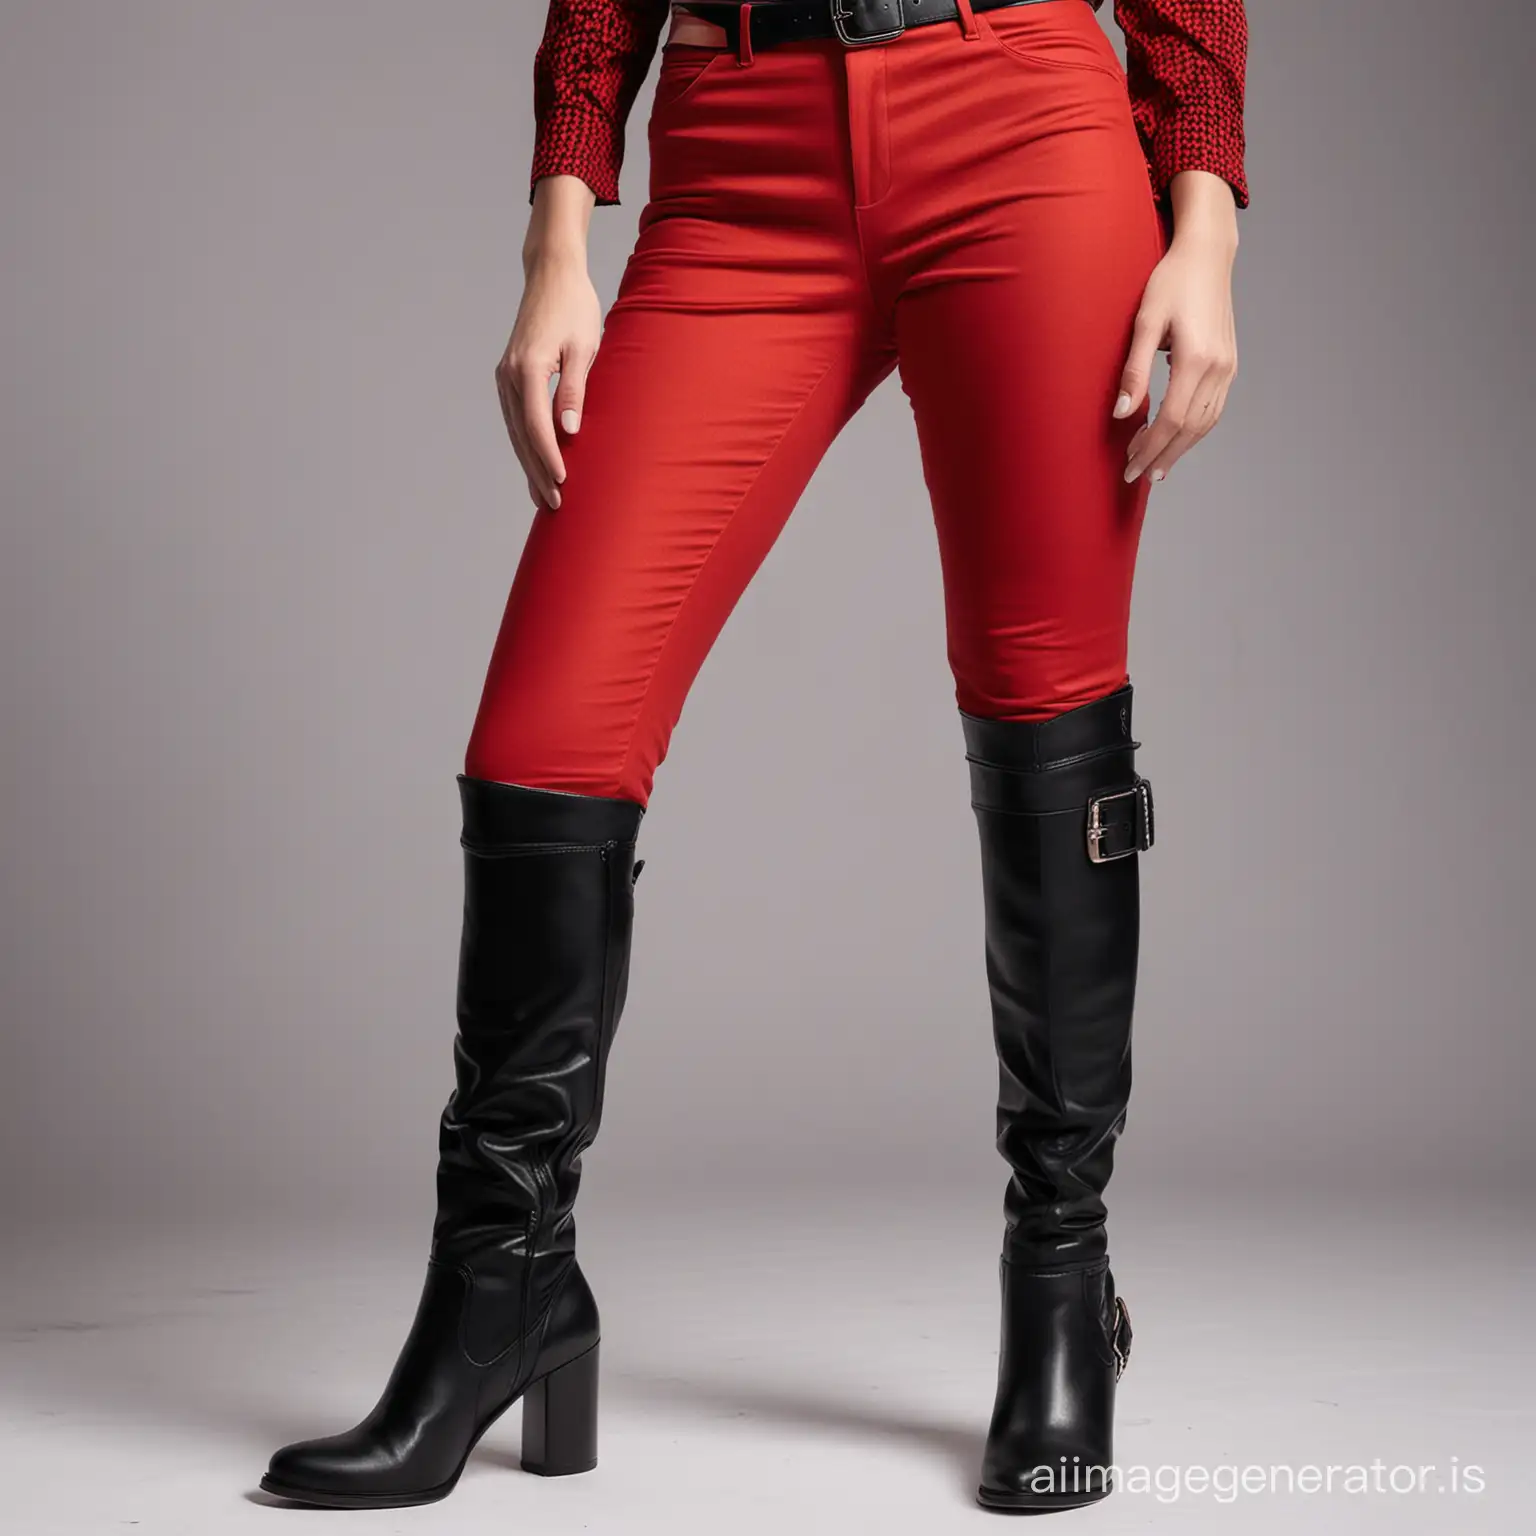 Fashionable-Woman-in-Red-Textile-Pants-and-Black-KneeHigh-Boots